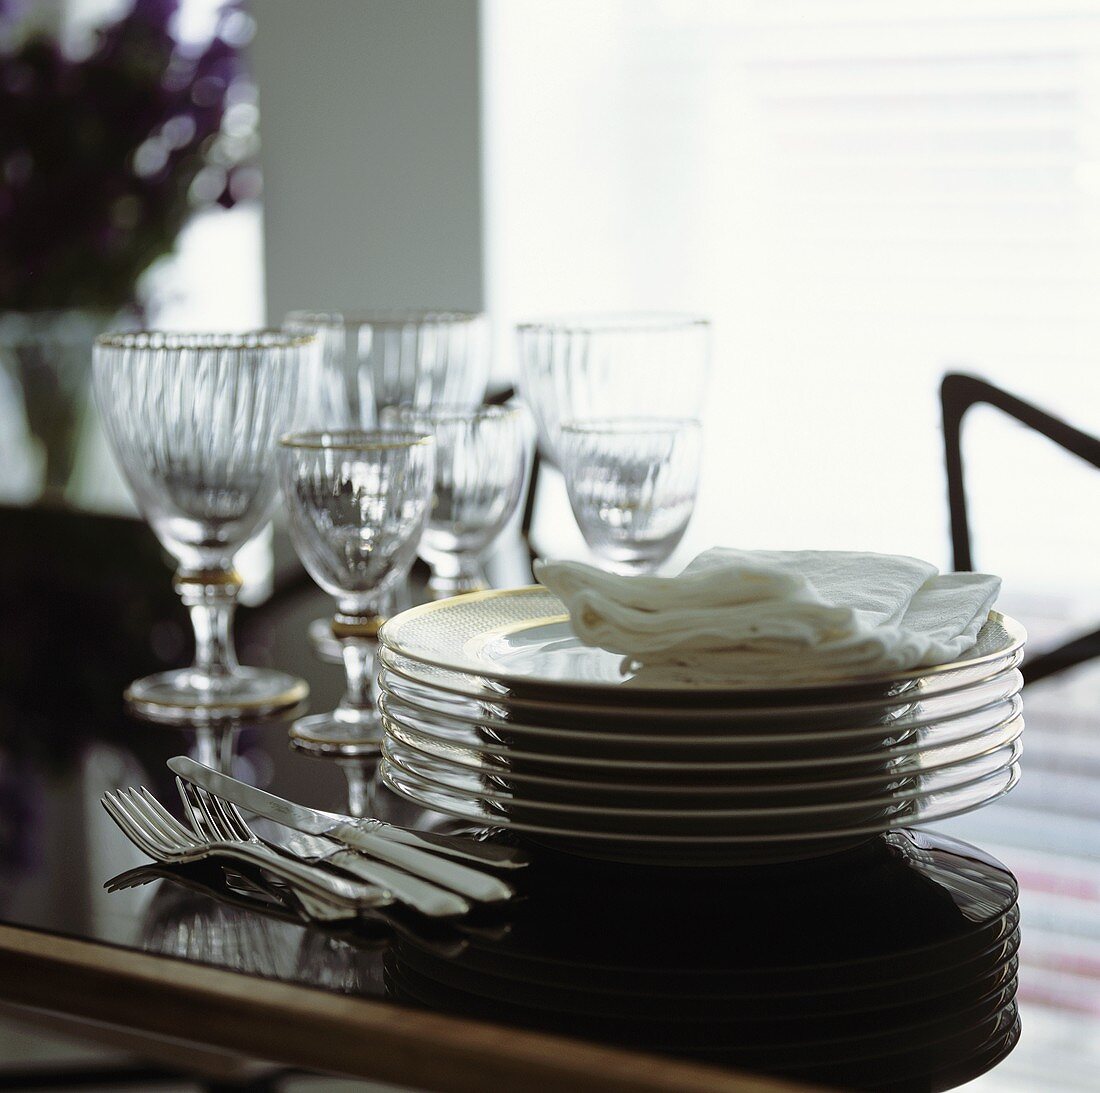 Pile of plates, cutlery and glasses on a dining table